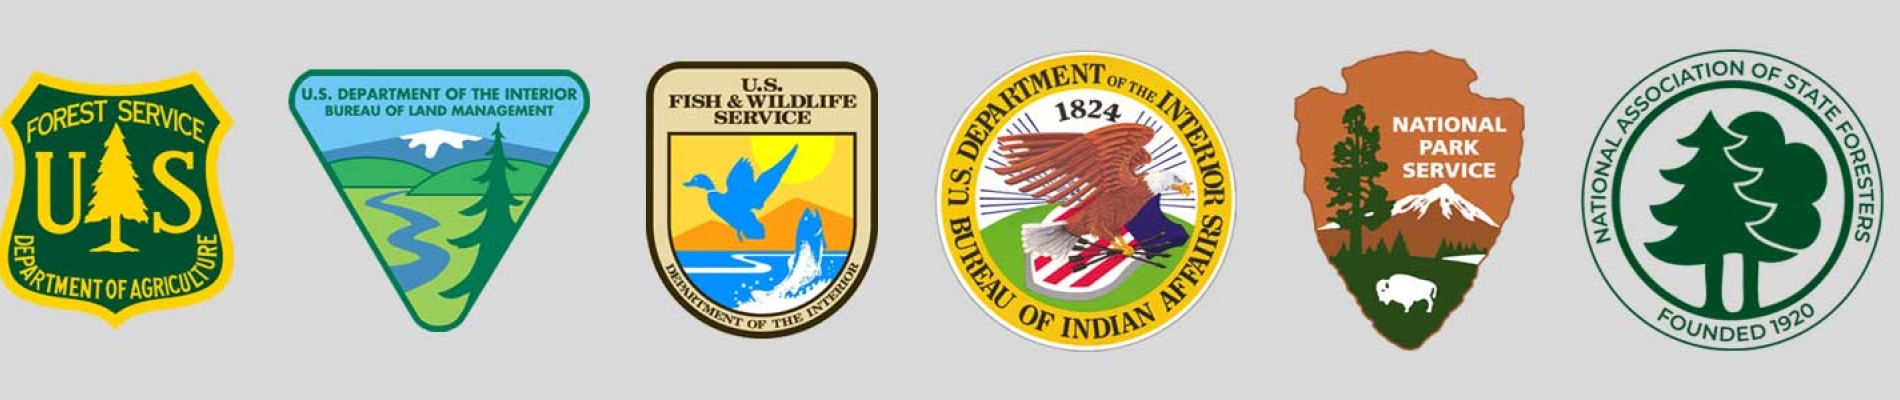 Logos of different land management agencies.